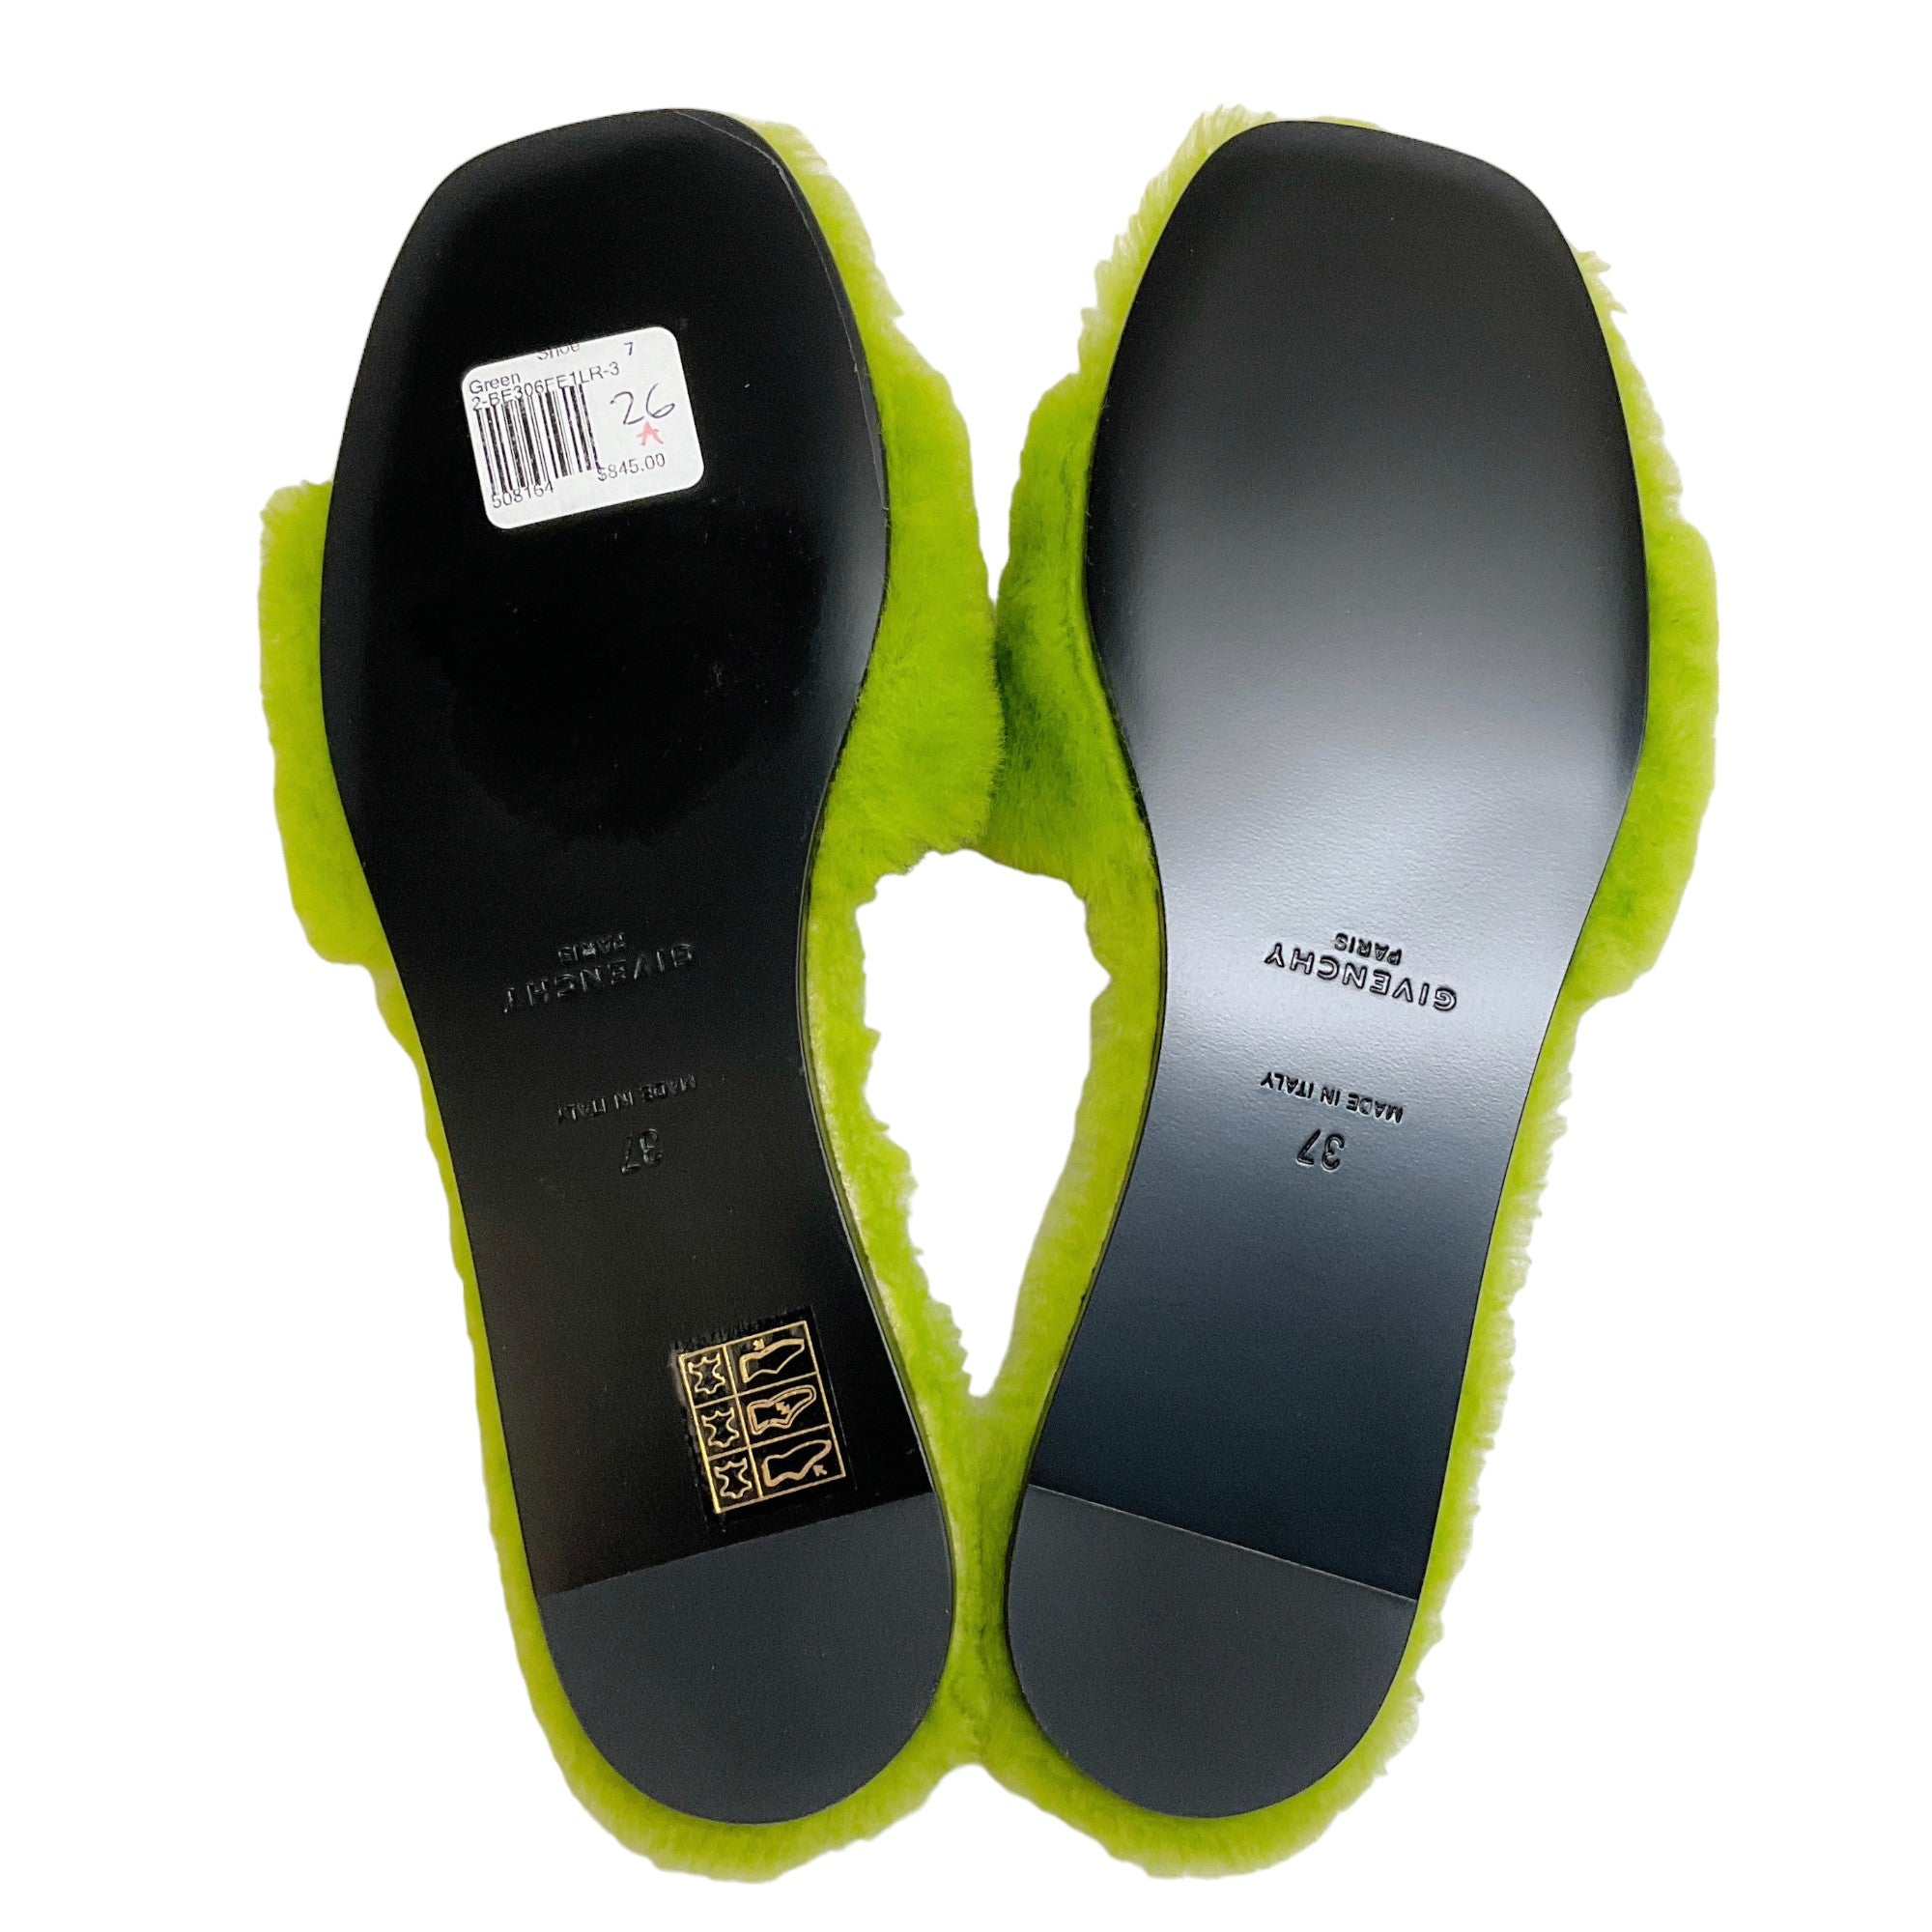 Givenchy Citrus Green Lambswool Slide Sandals